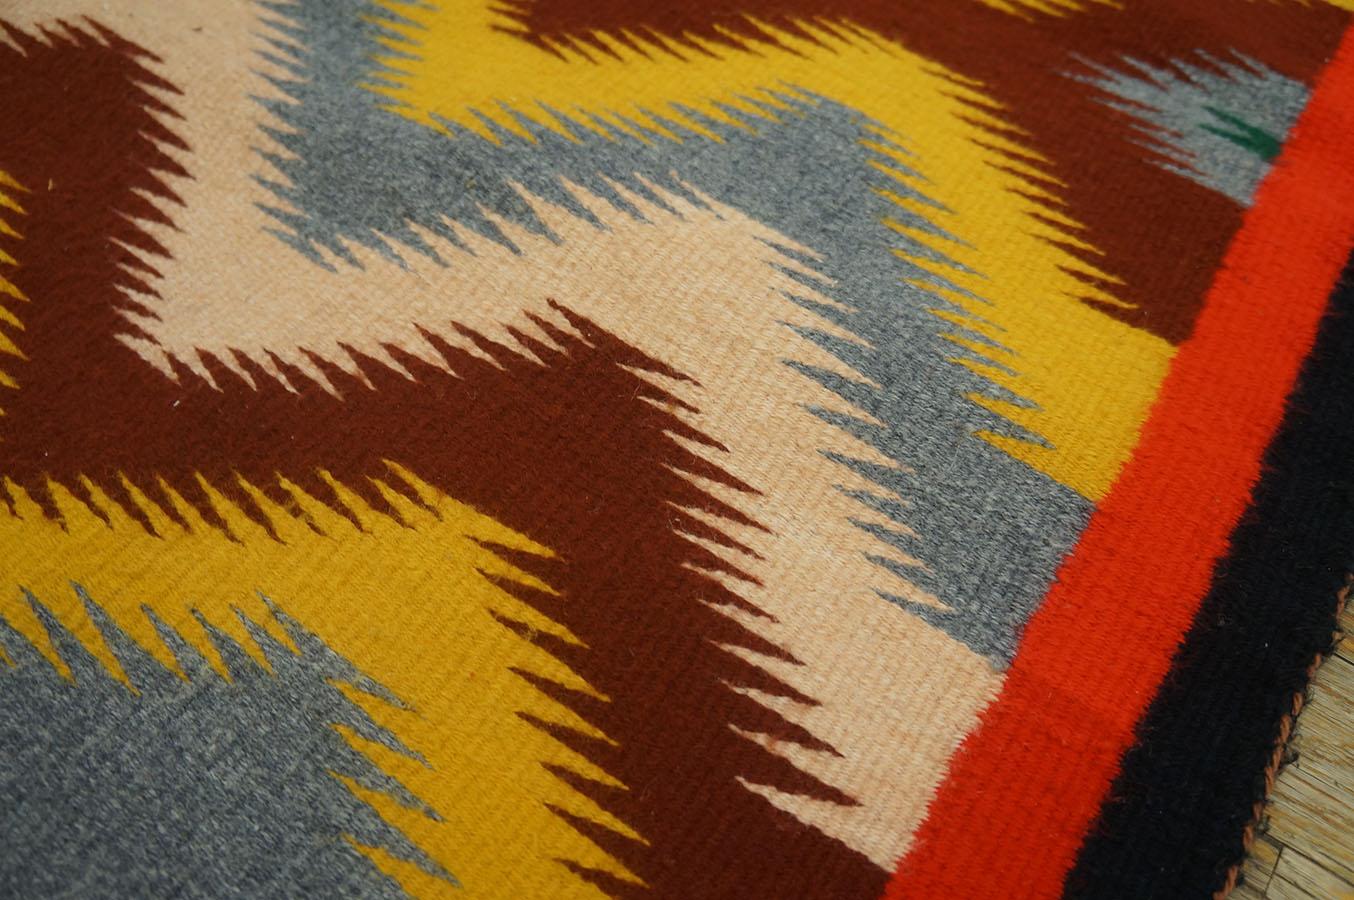 Mid 20th Century American Navajo Rug ( 2' 3'' x 3' 3'' - 68 x 99 )  In Excellent Condition For Sale In New York, NY